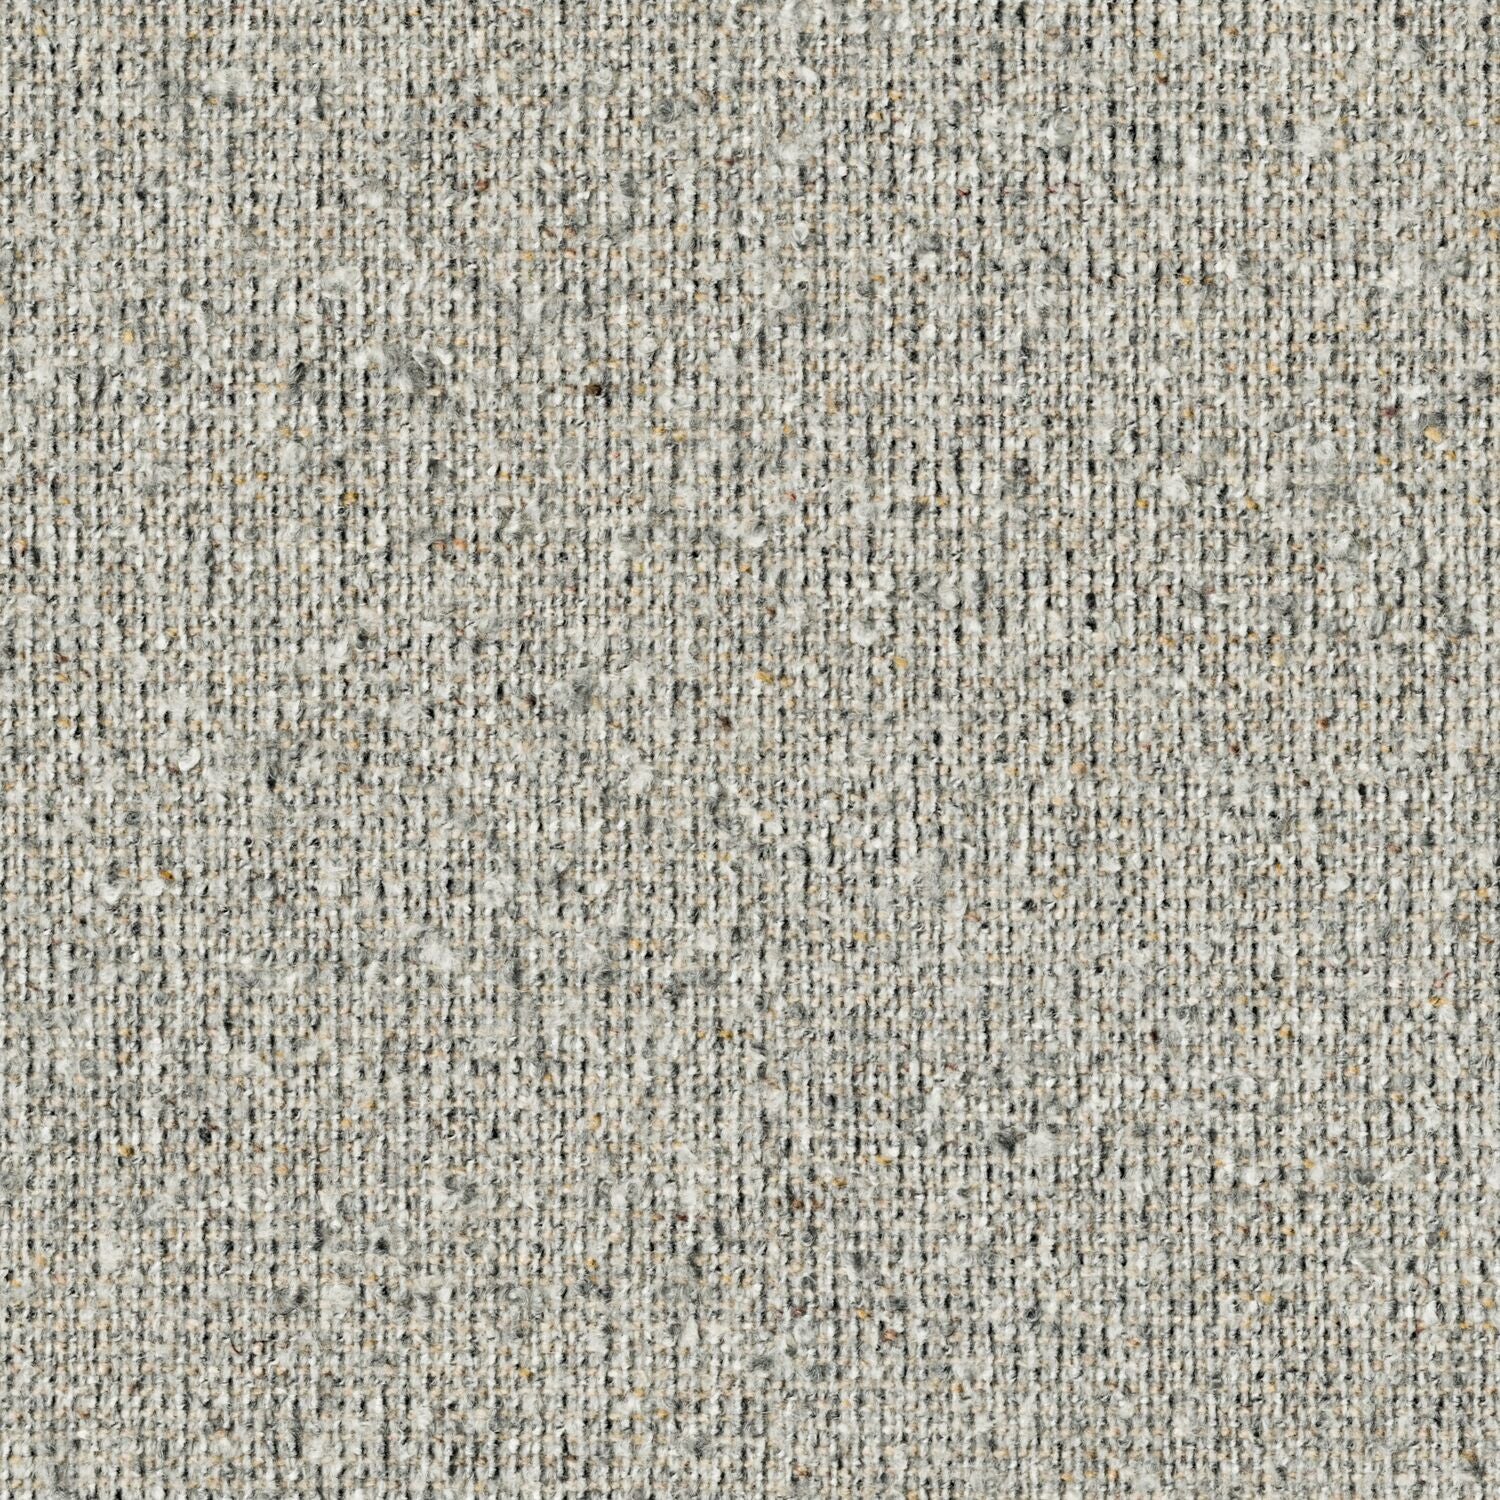 Everyday Boucle - Silver Aster - 4111 - 04